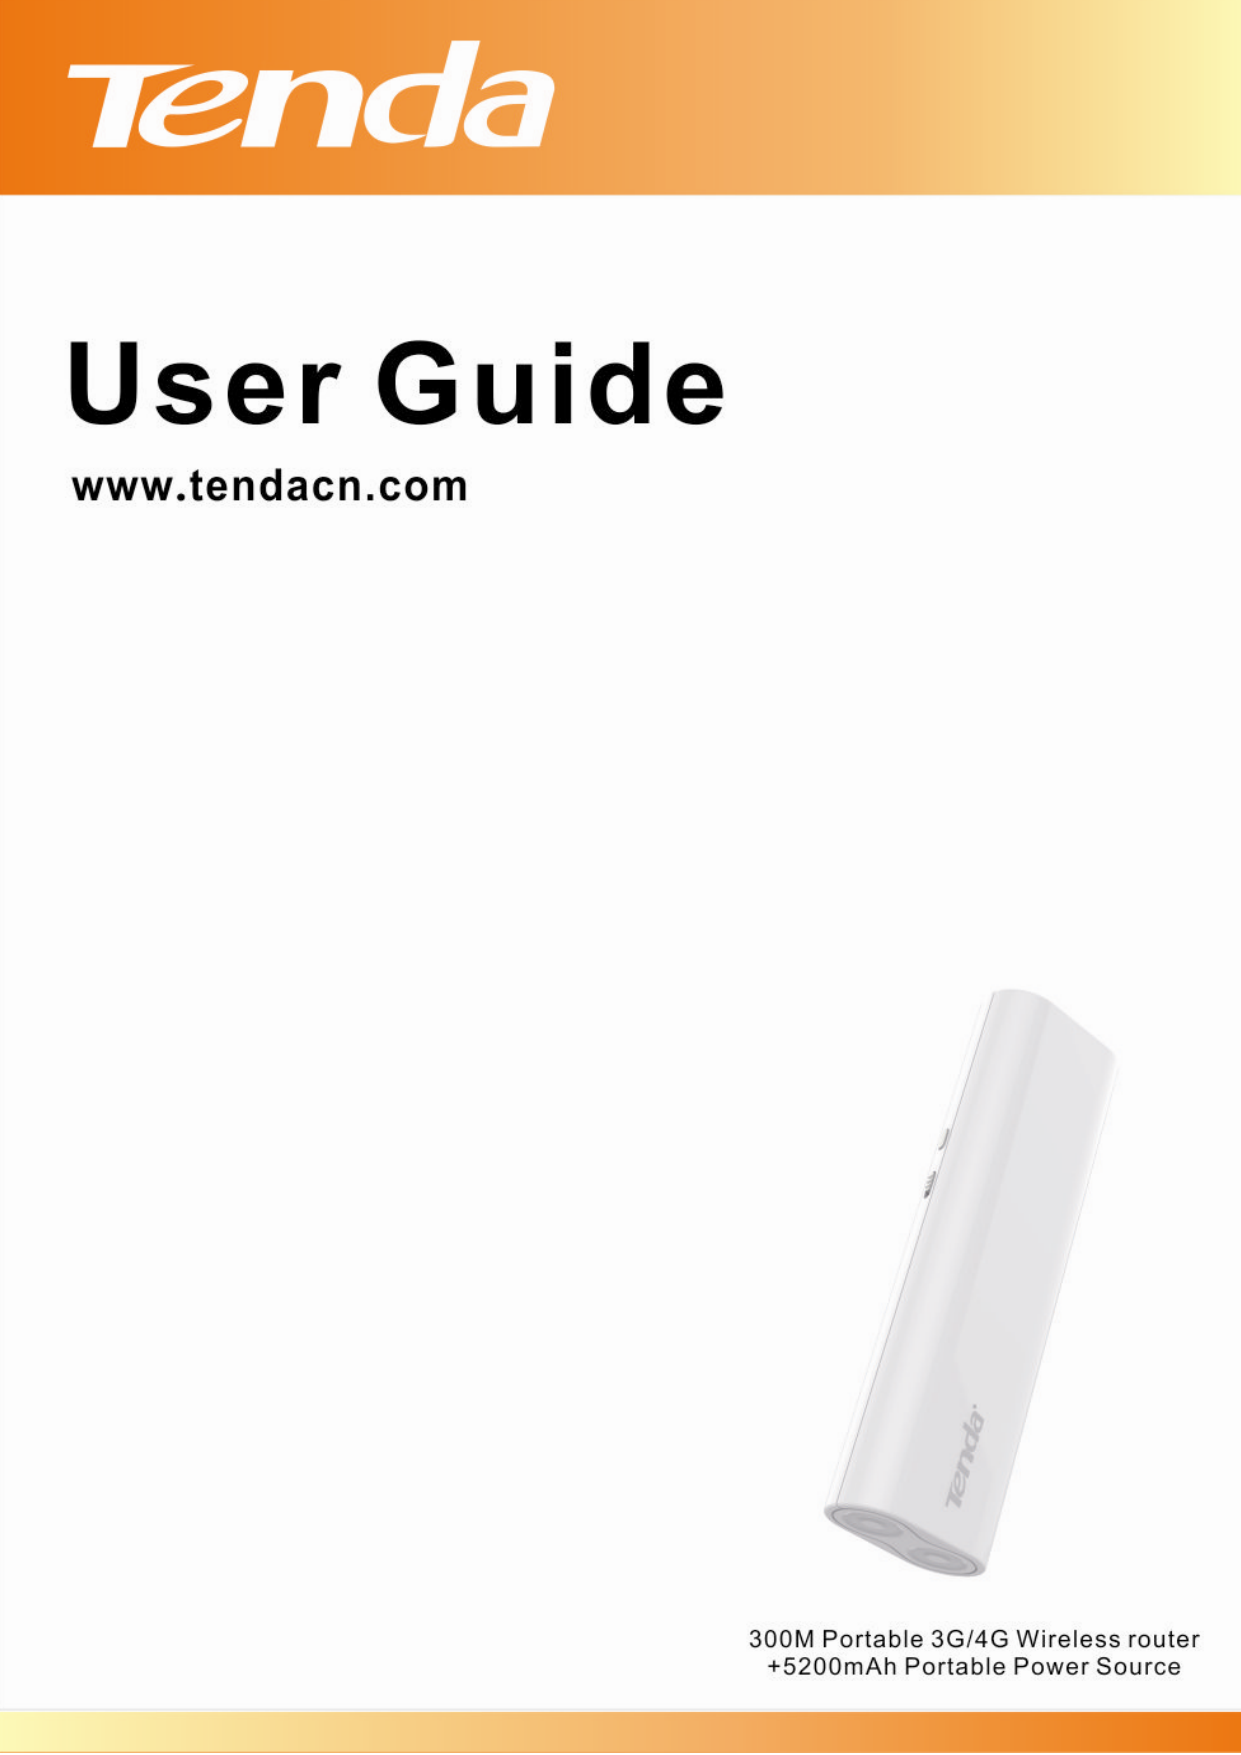                                                    3G/4G Wireless Router User Guide    I   